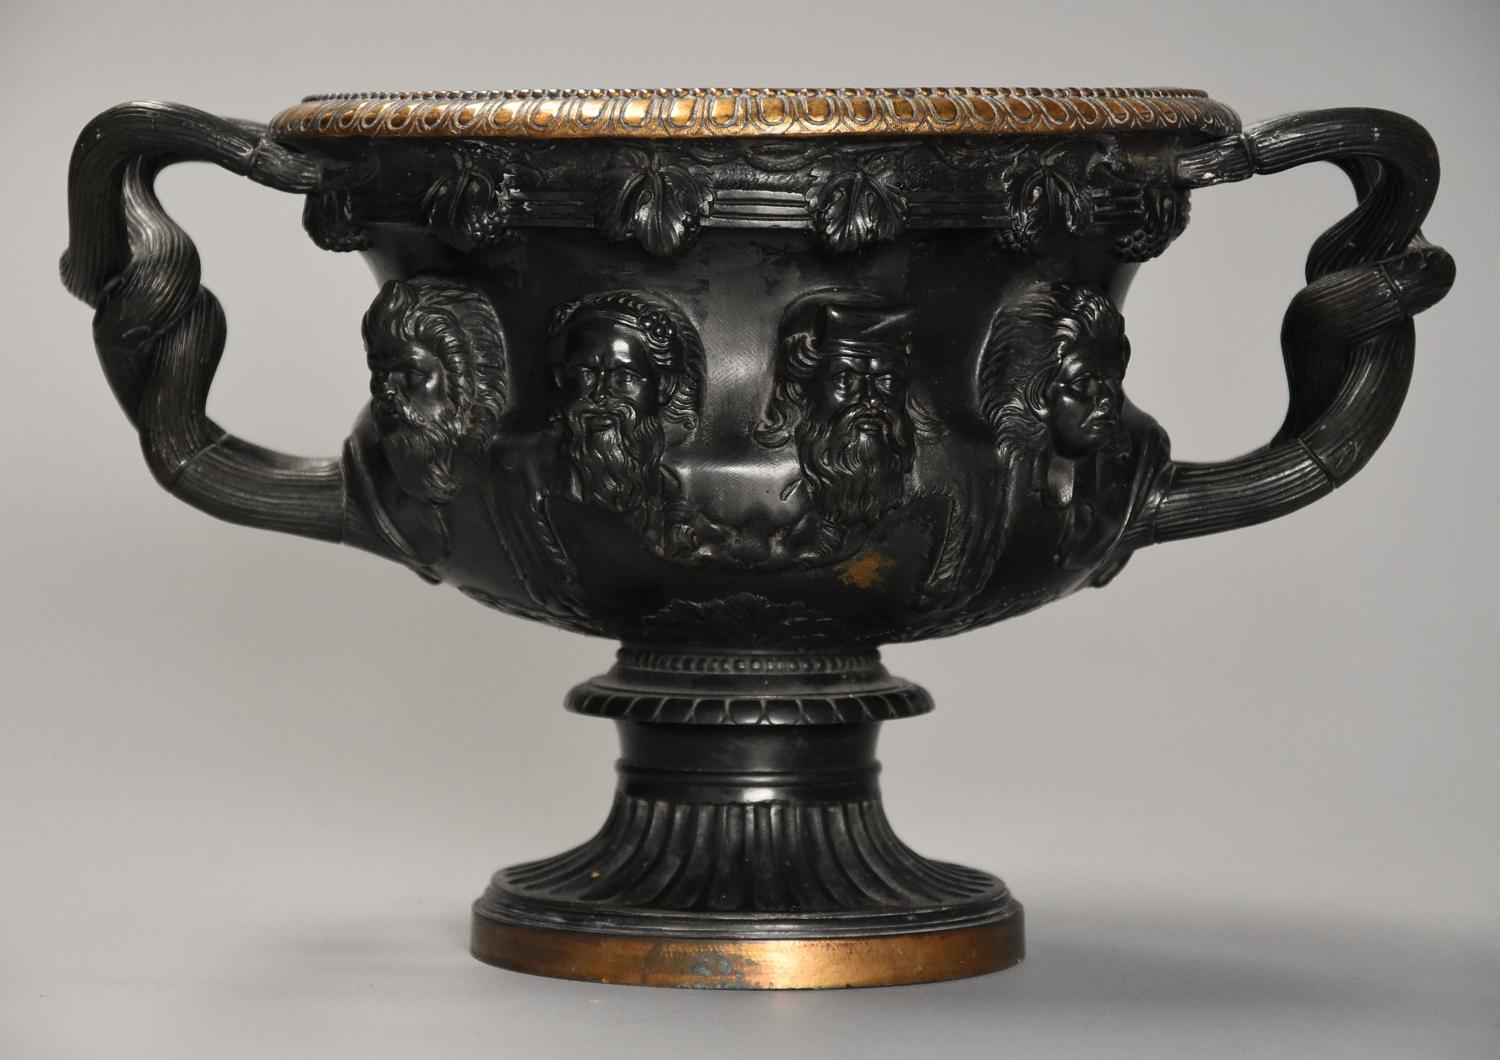 19thc Grand Tour bronze reduction 'Warwick Vase' after the Antique